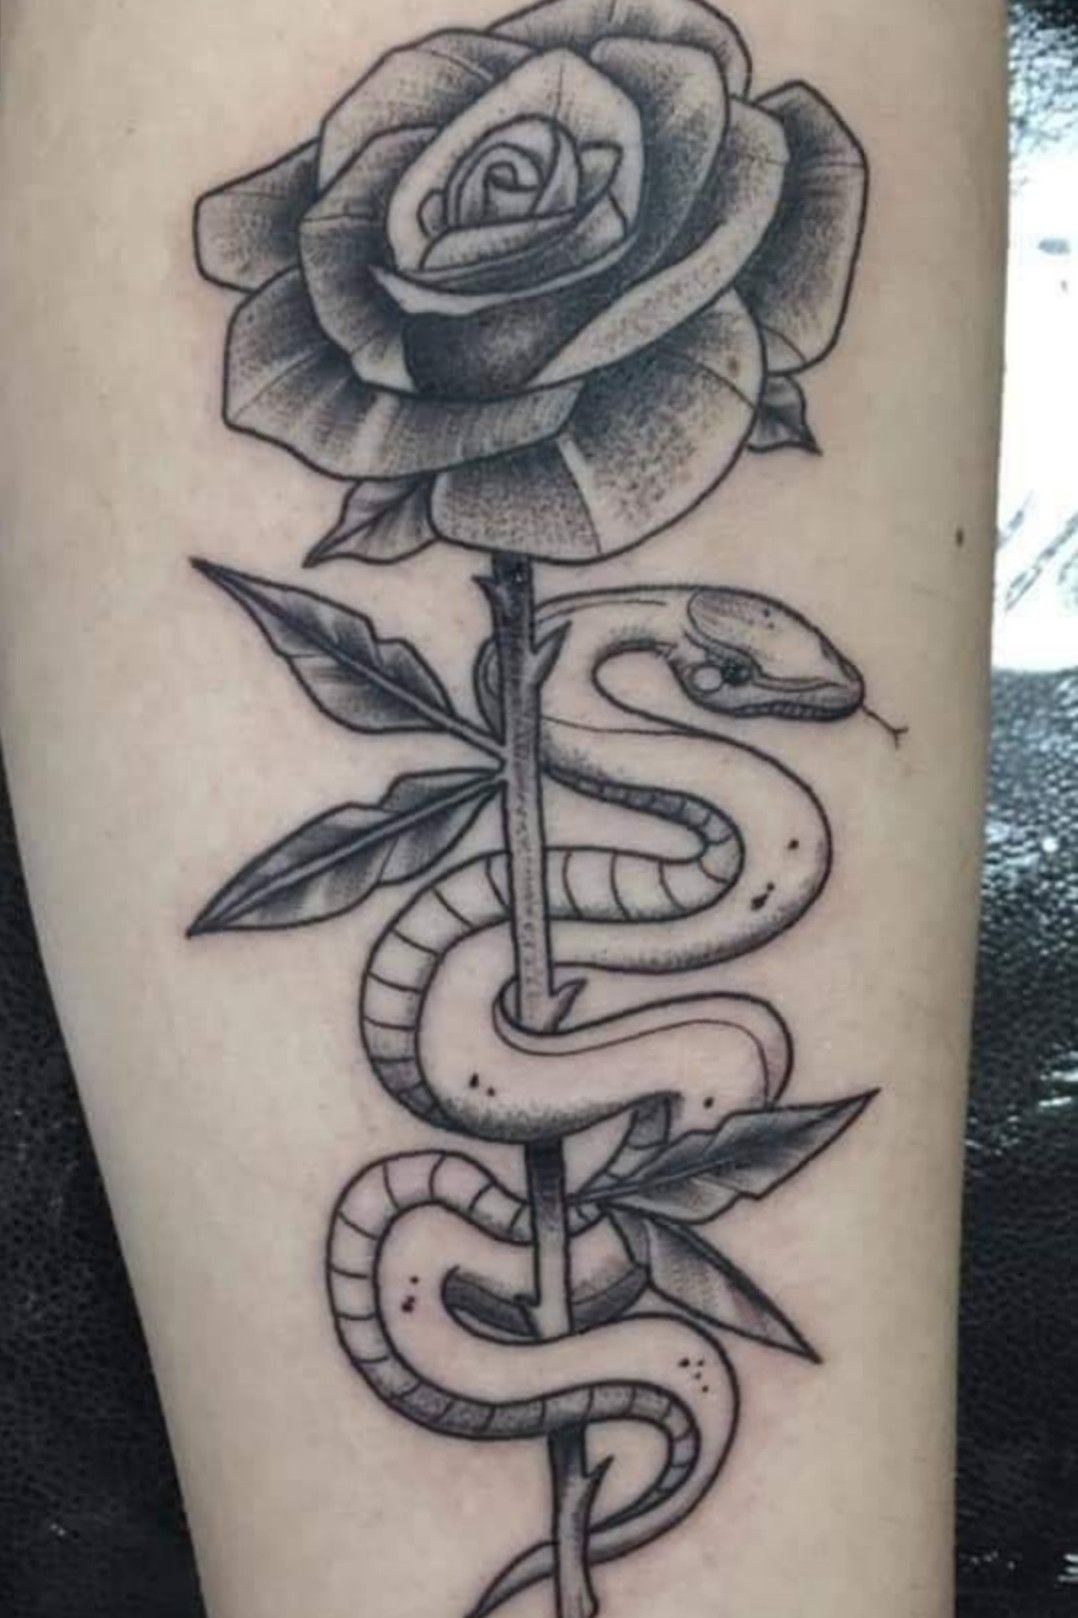 Snake and red rose tattoo located on the upper arm